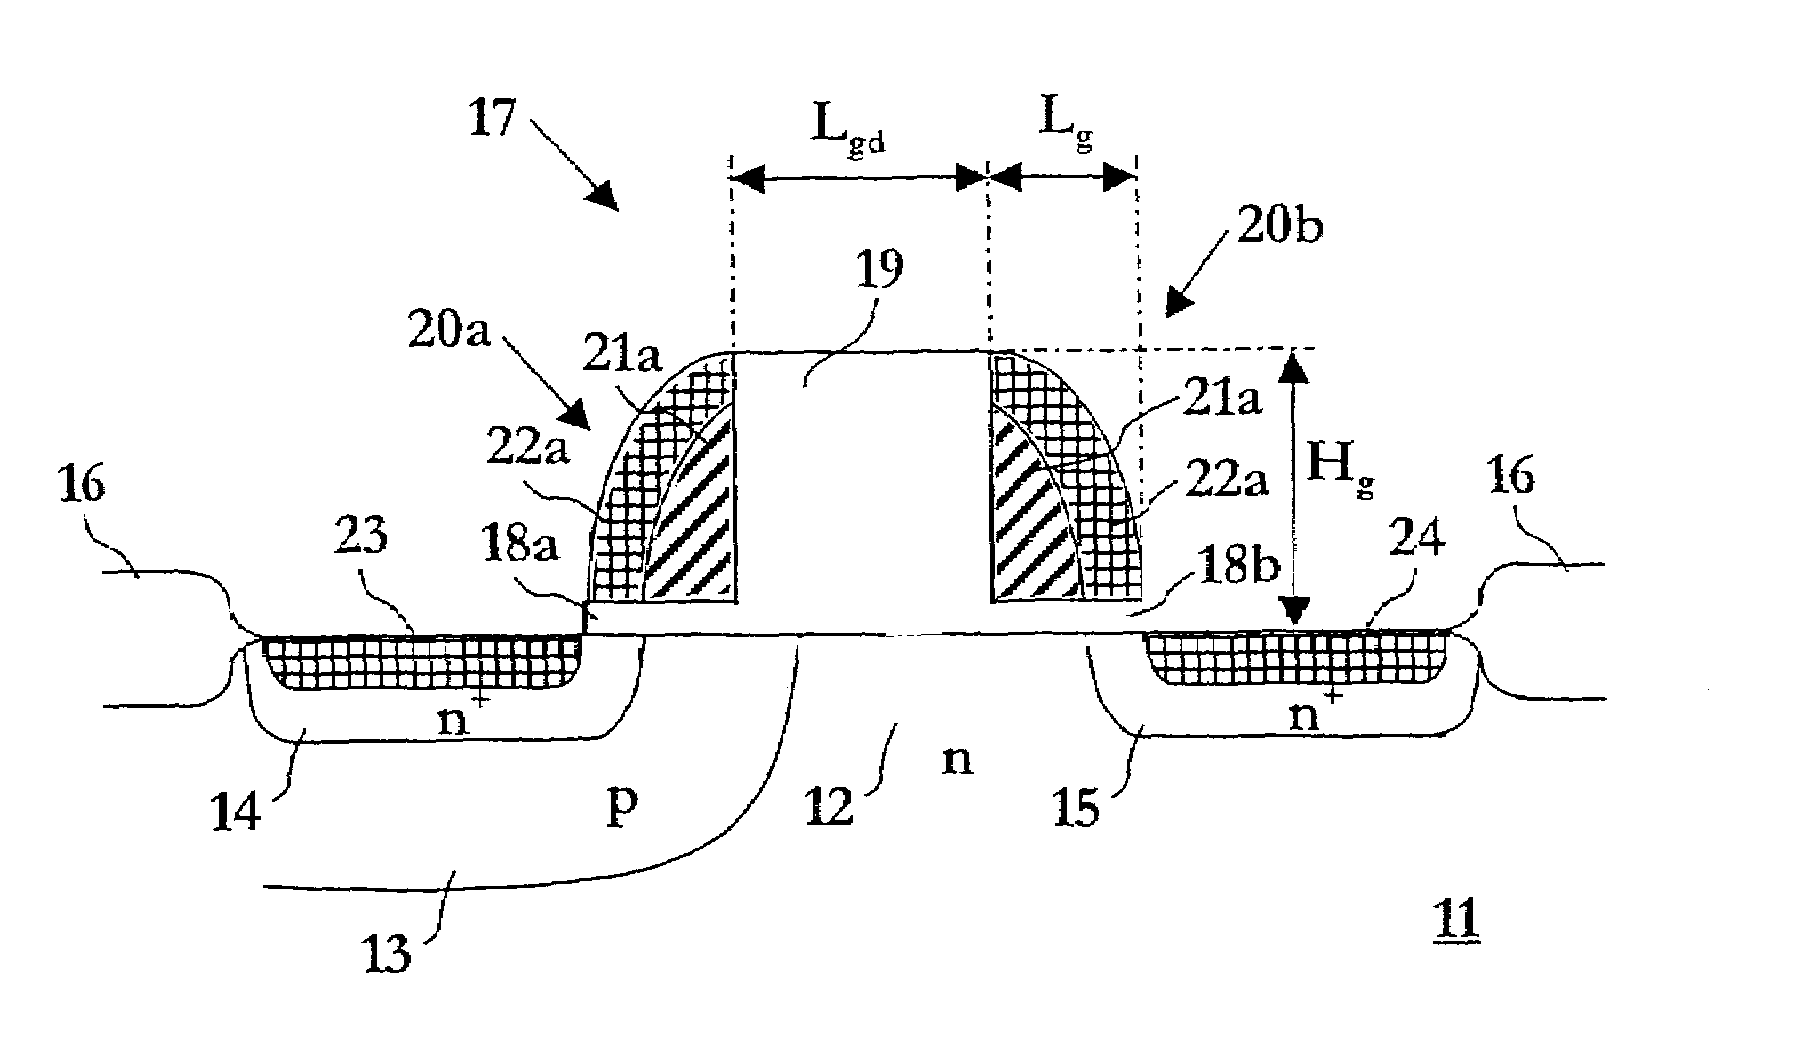 LDMOS transistor device employing spacer structure gates